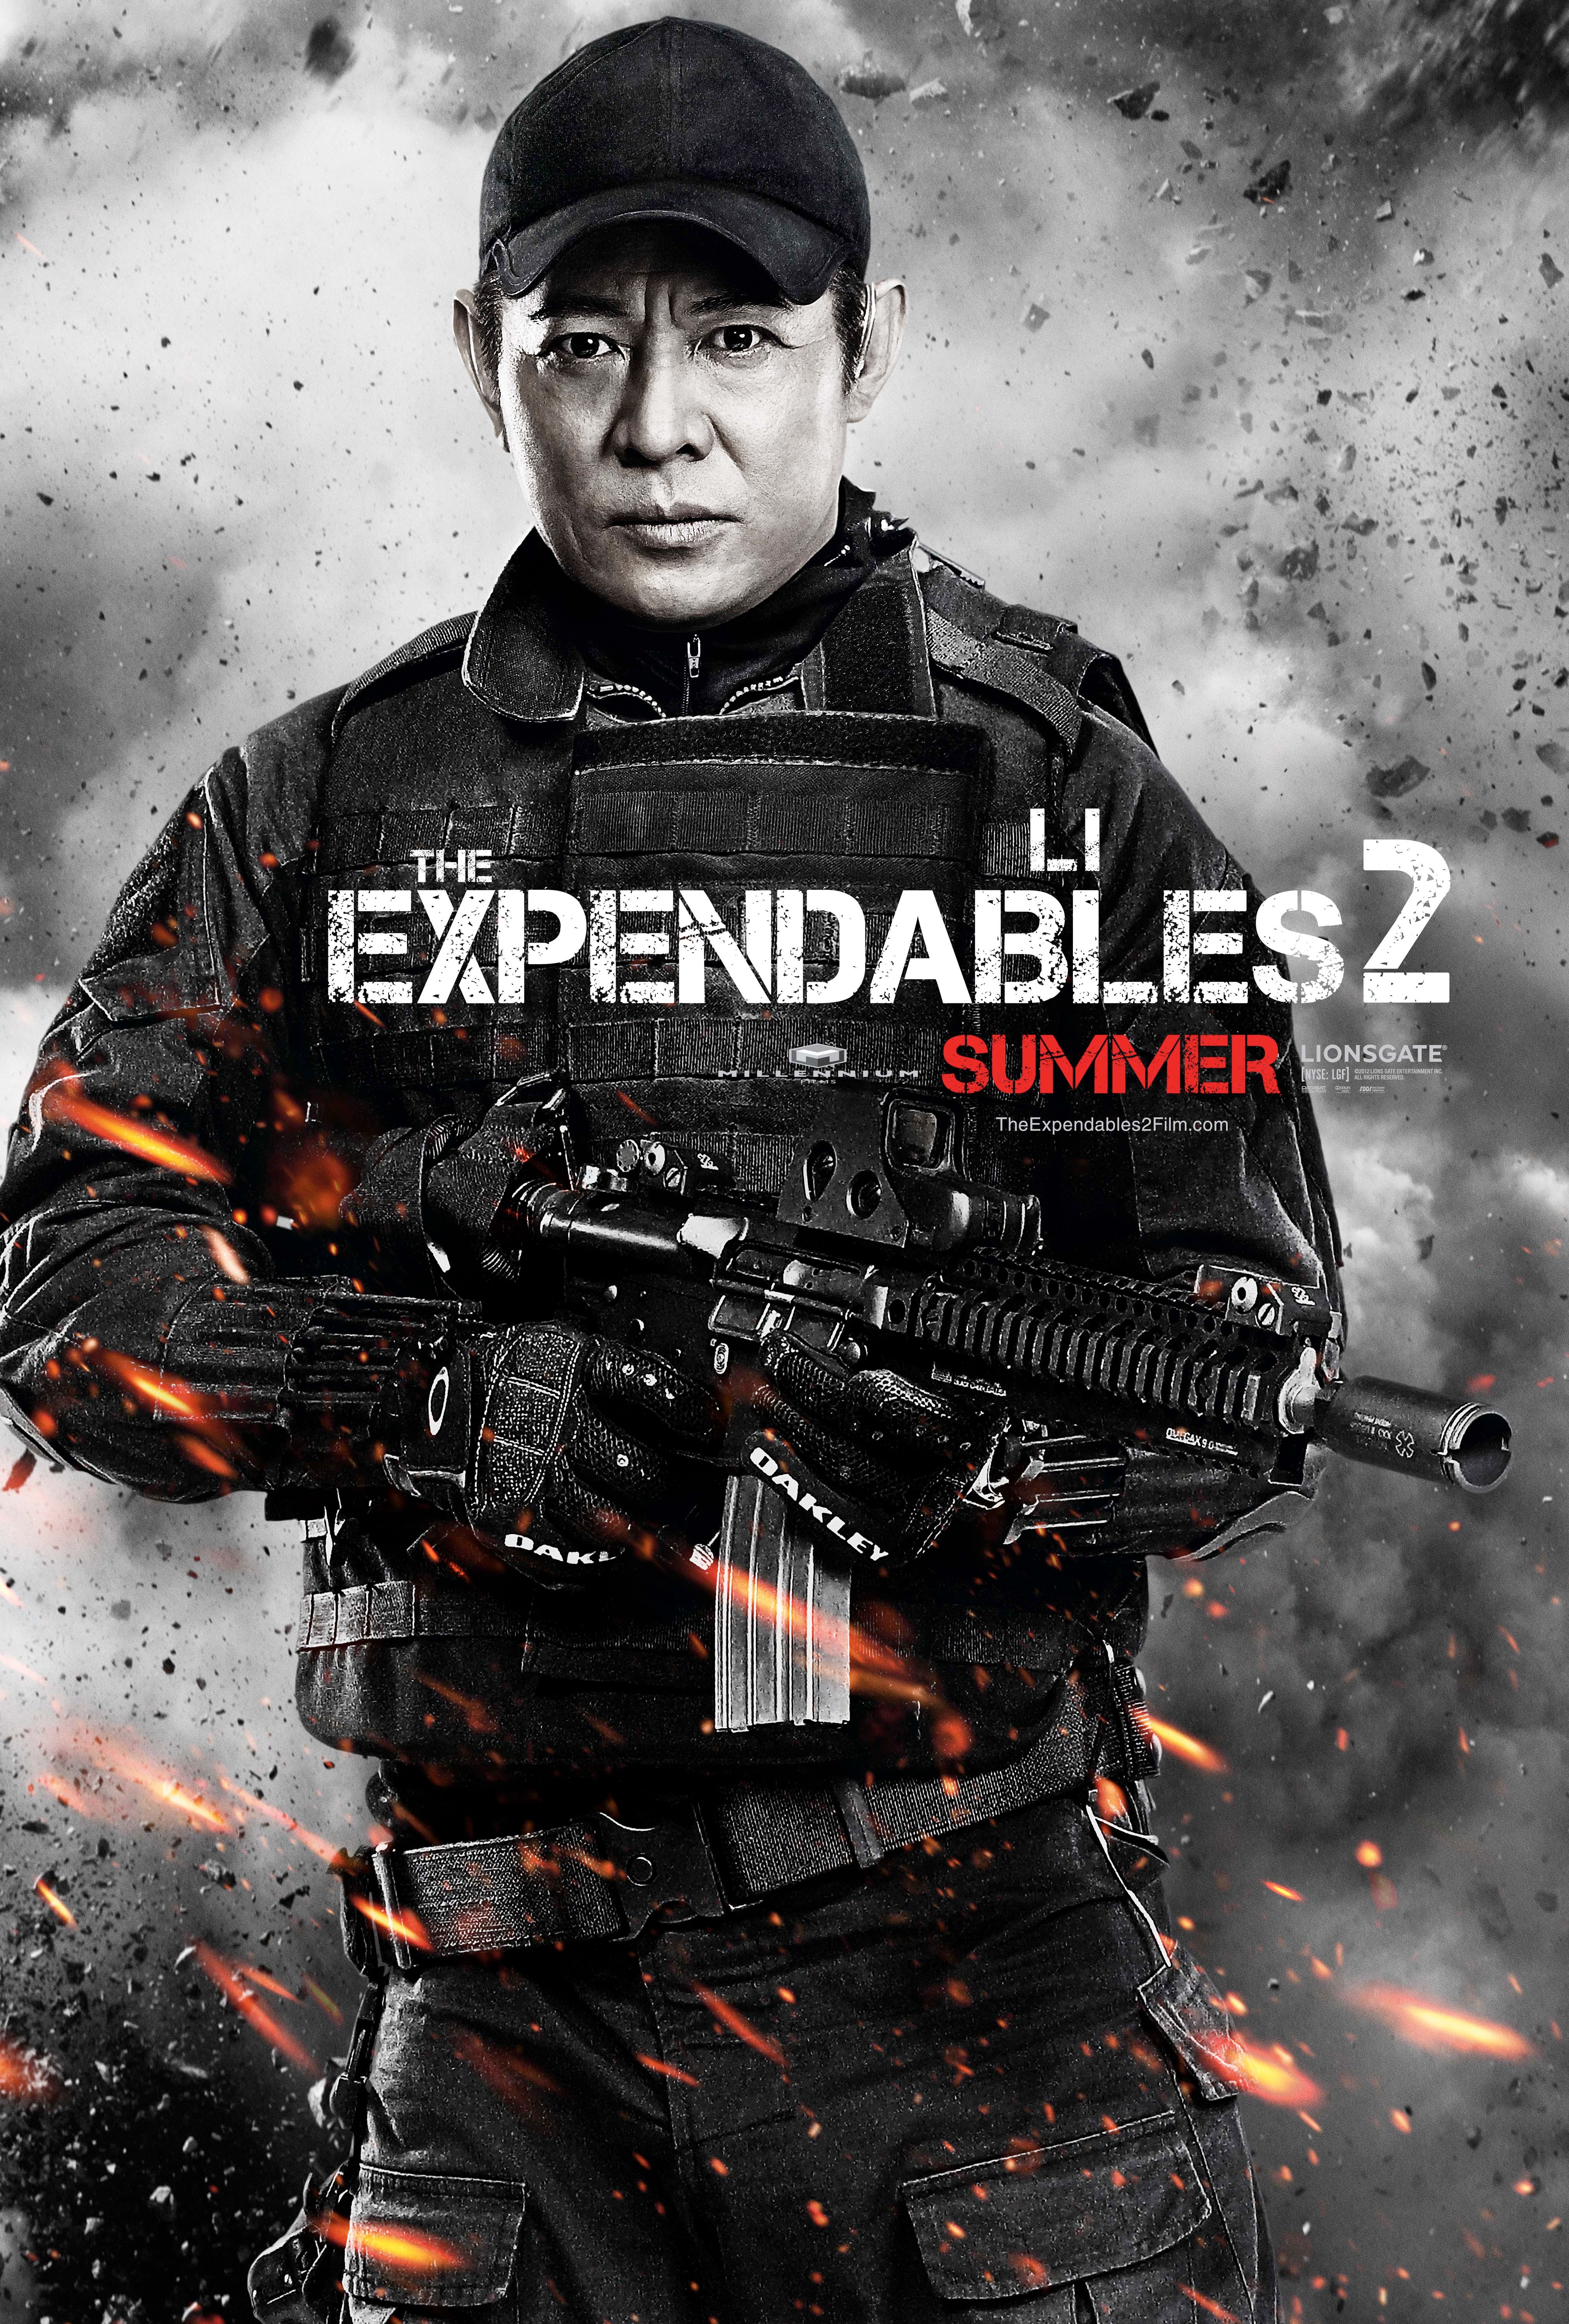 The Expendables 2 Character Poser #6